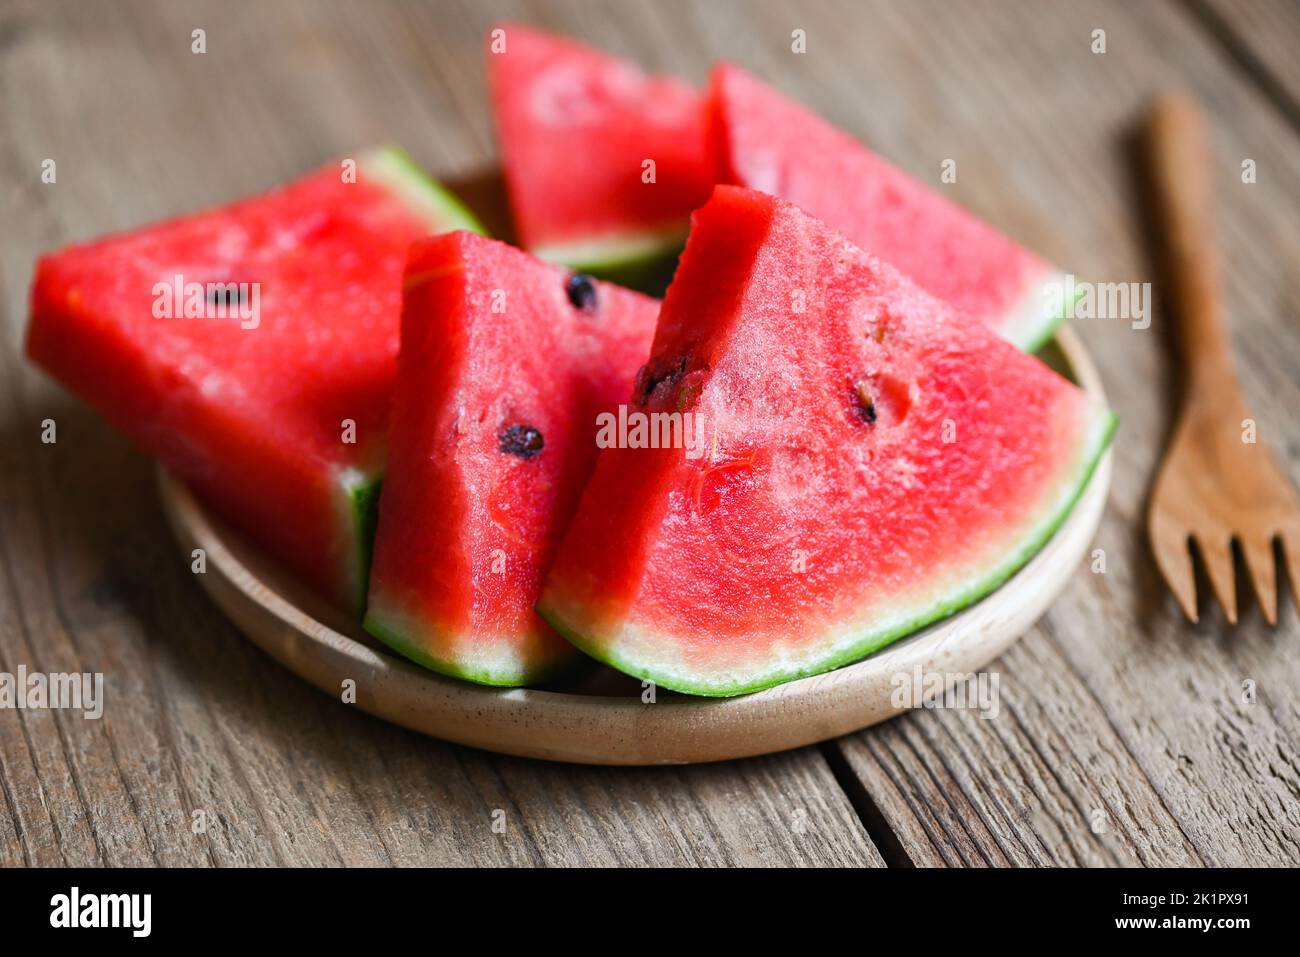 Sweet watermelon slices pieces fresh watermelon tropical summer fruit, Watermelon slice on plate wooden background Stock Photo